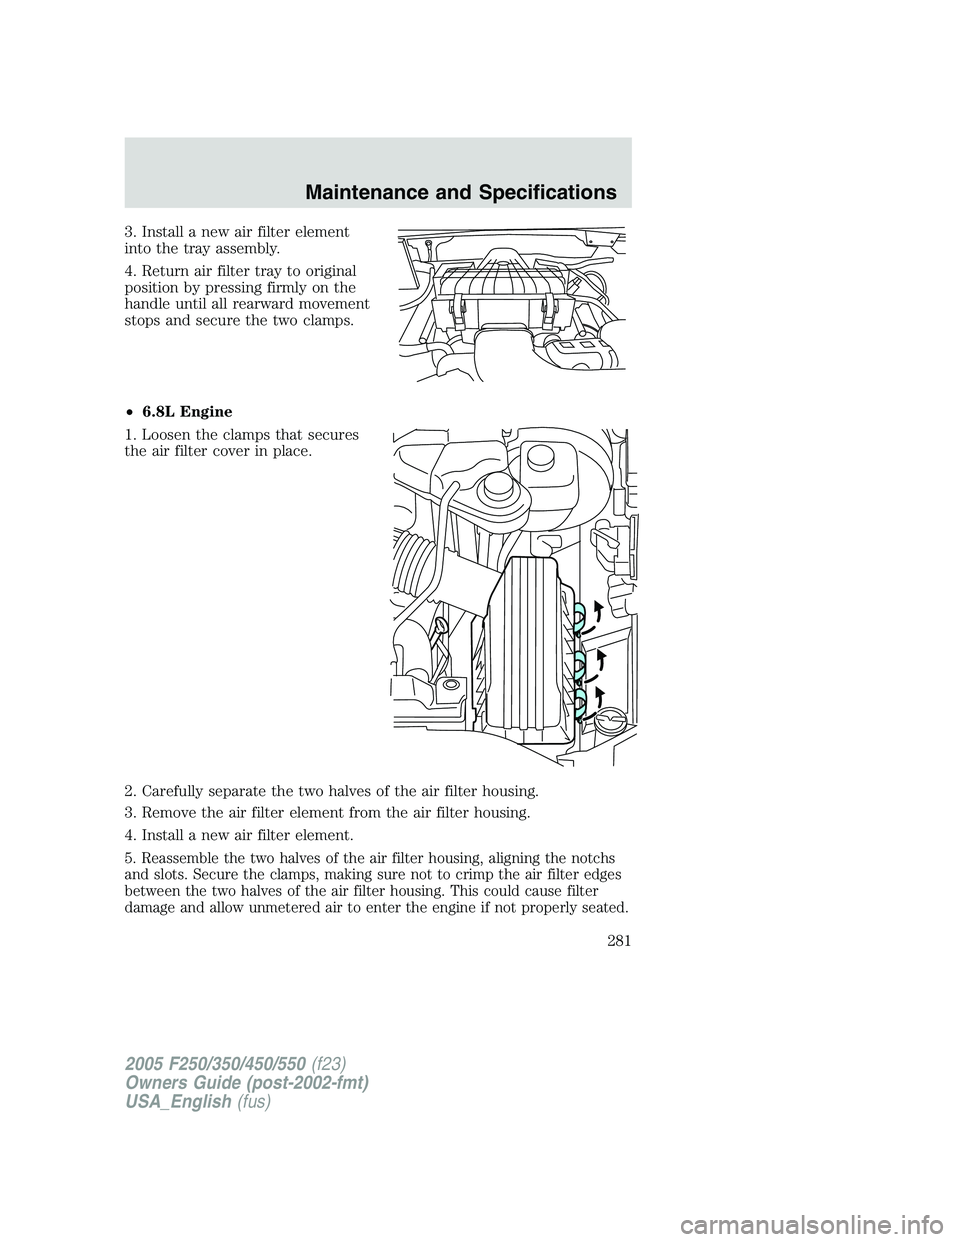 FORD F250 SUPER DUTY 2005  Owners Manual 3. Install a new air filter element
into the tray assembly.
4. Return air filter tray to original
position by pressing firmly on the
handle until all rearward movement
stops and secure the two clamps.